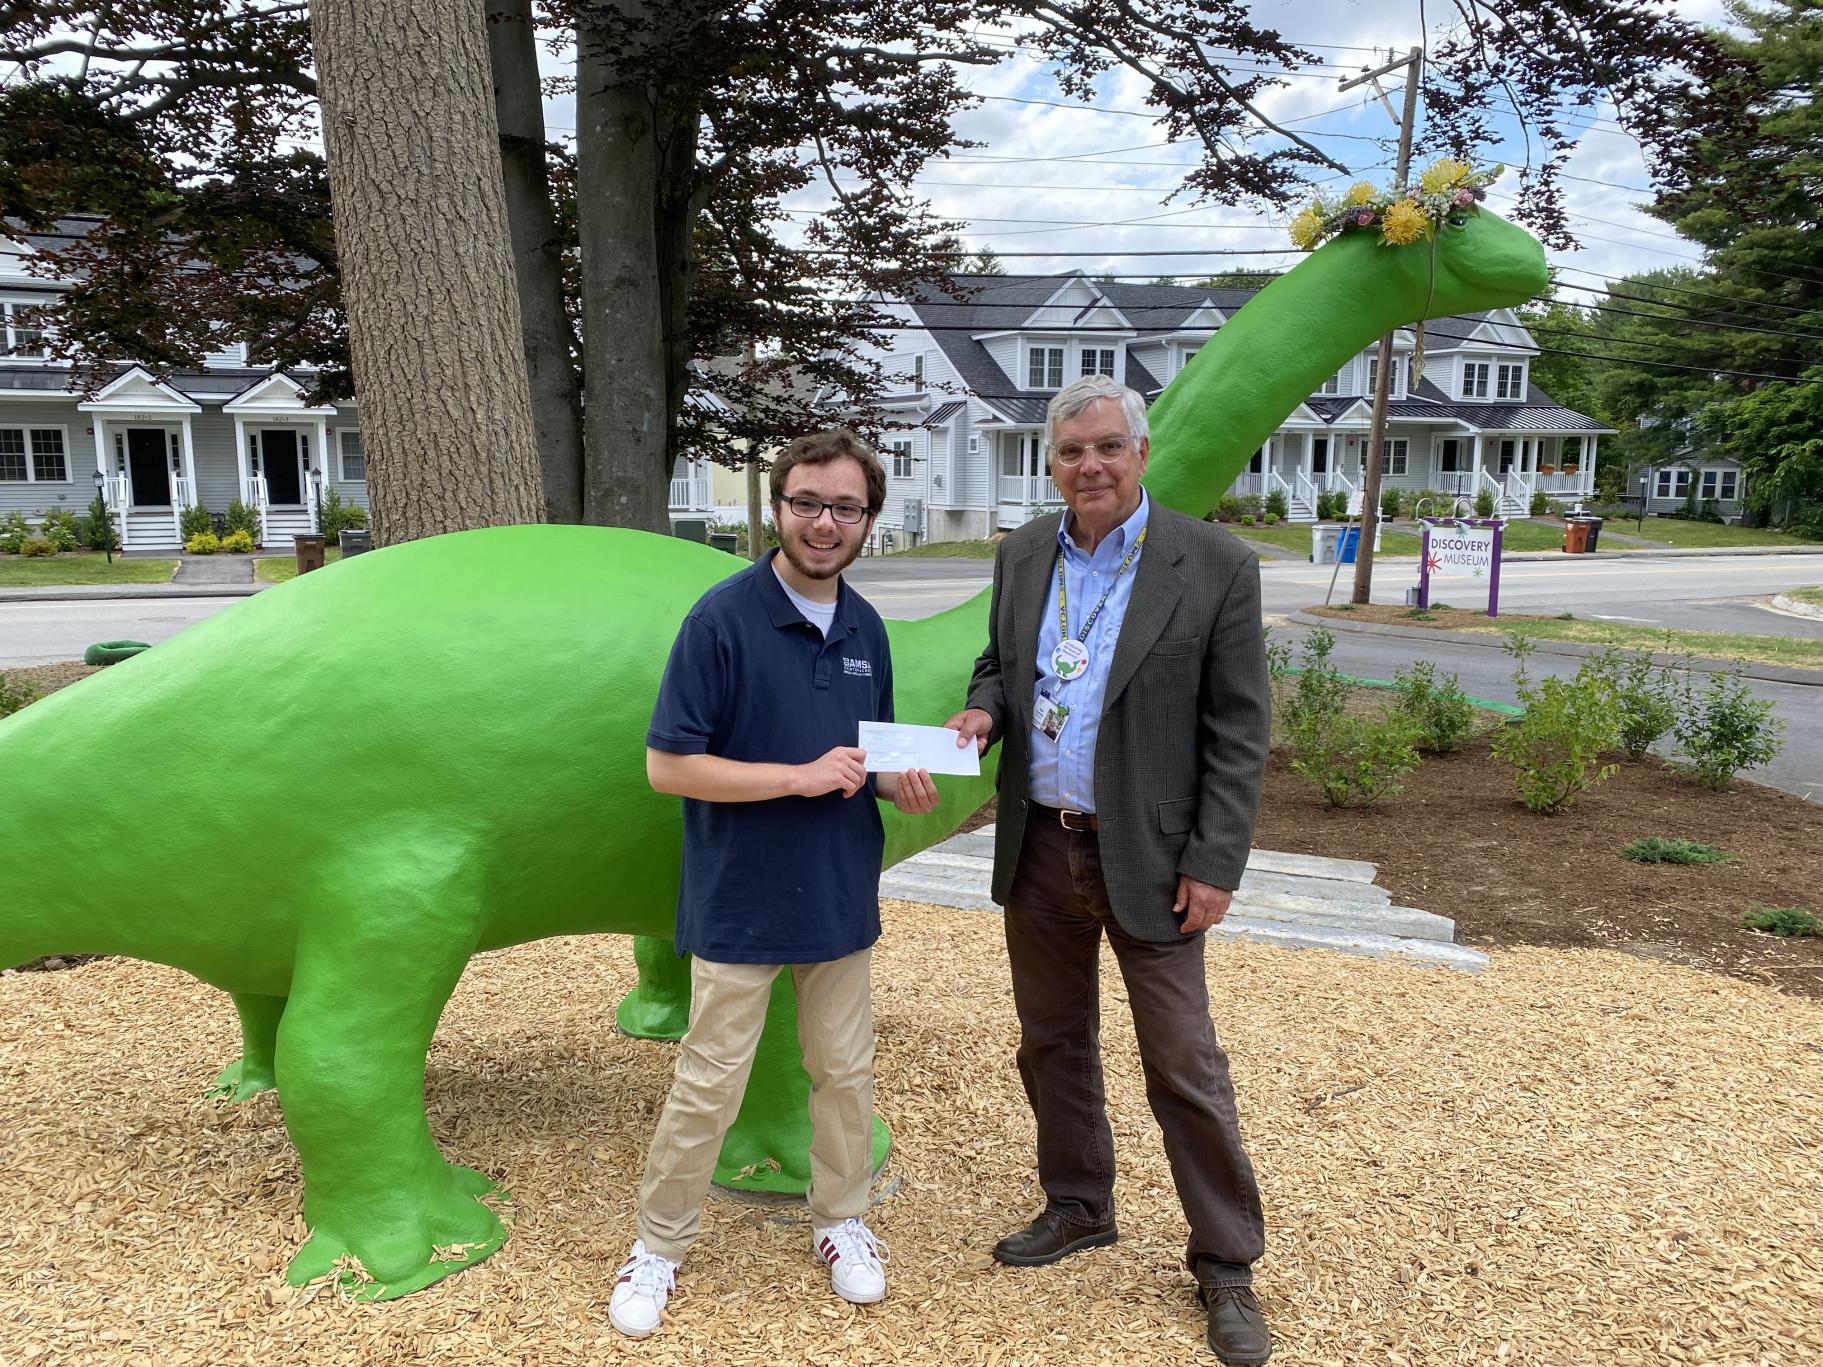 CEO Neil Gordon and scholarshp recipient Ajax Benander at Discovery Museum with Bessie the Dinosaur